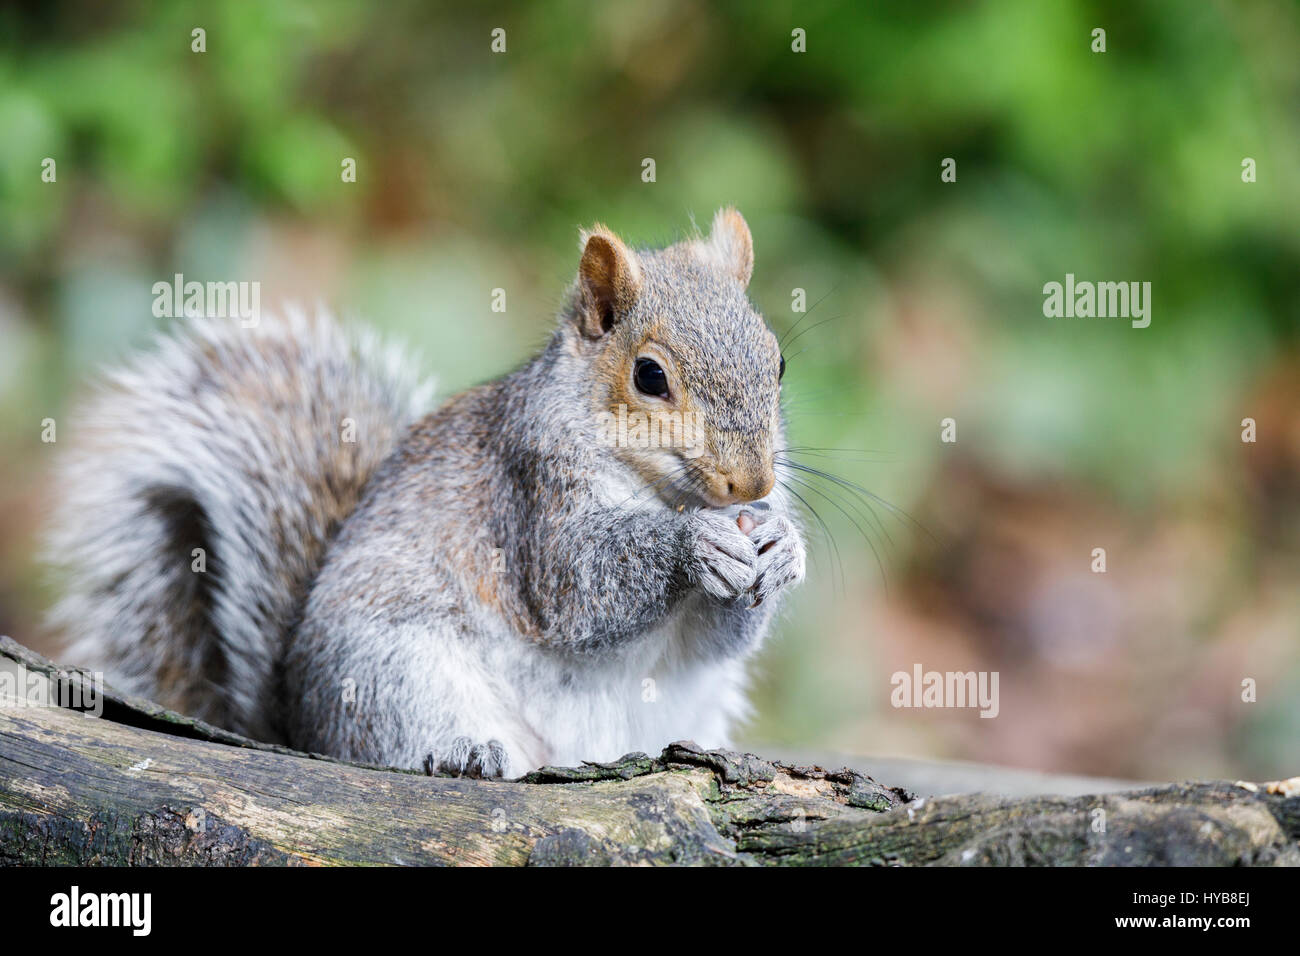 American grey squirrel, Sciurus carolinensis, sitting up eating from its paws and looking cute and appealing in a Surrey garden in spring Stock Photo